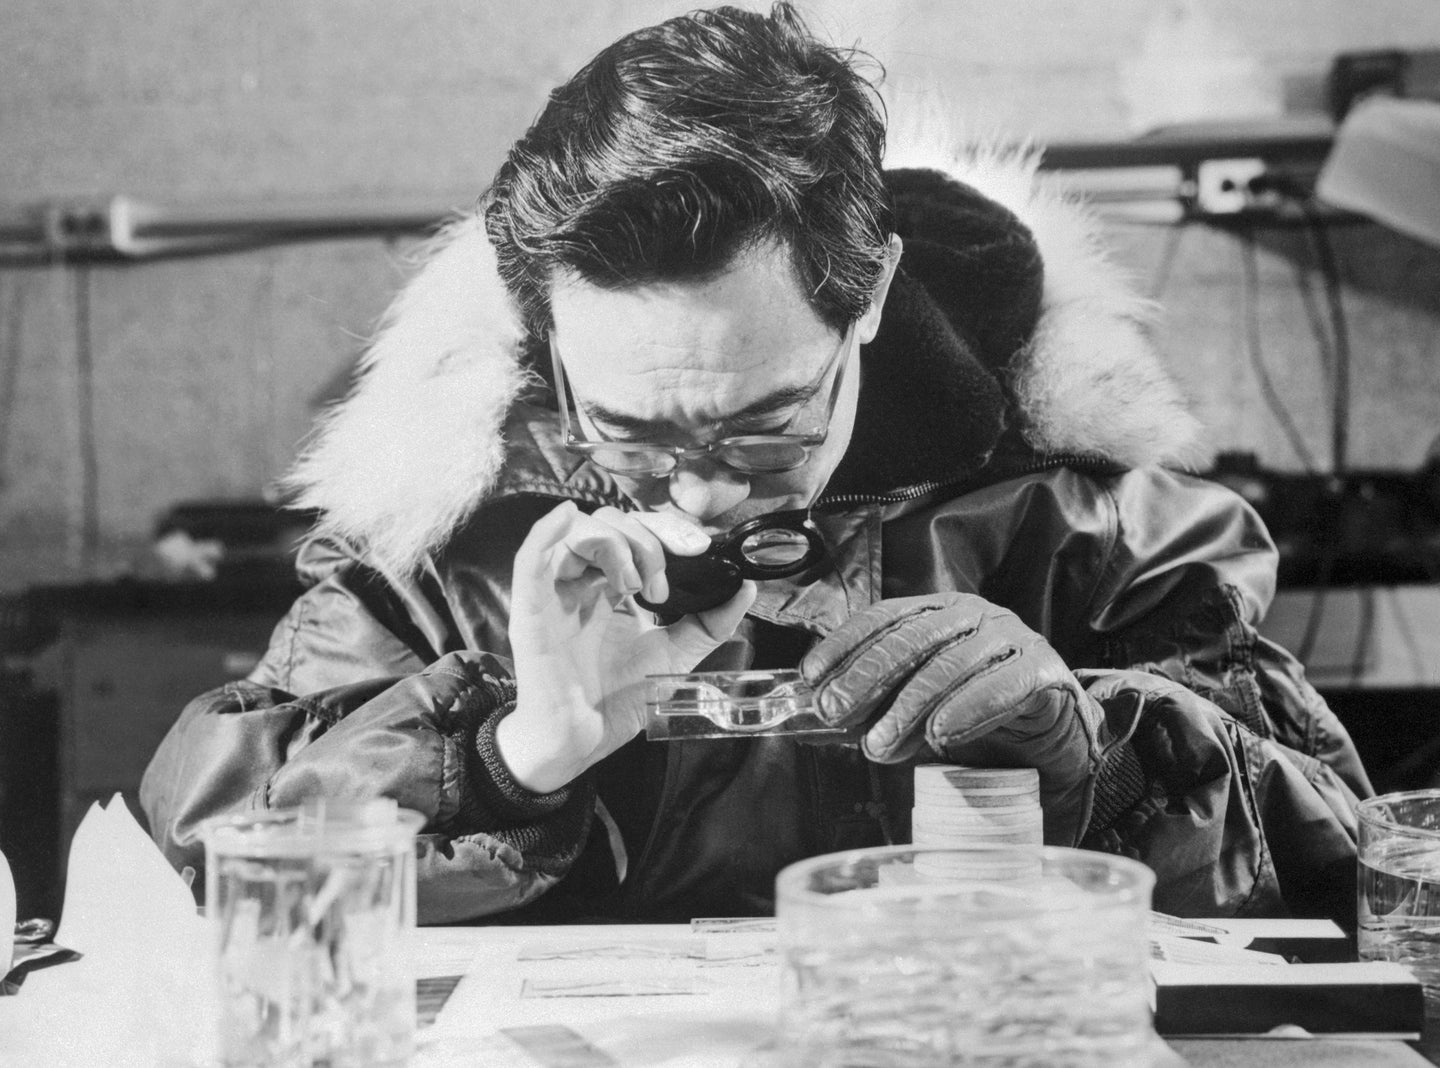 Arctic researcher studying permafrost samples for viruses and other microbes. Image is black and white.